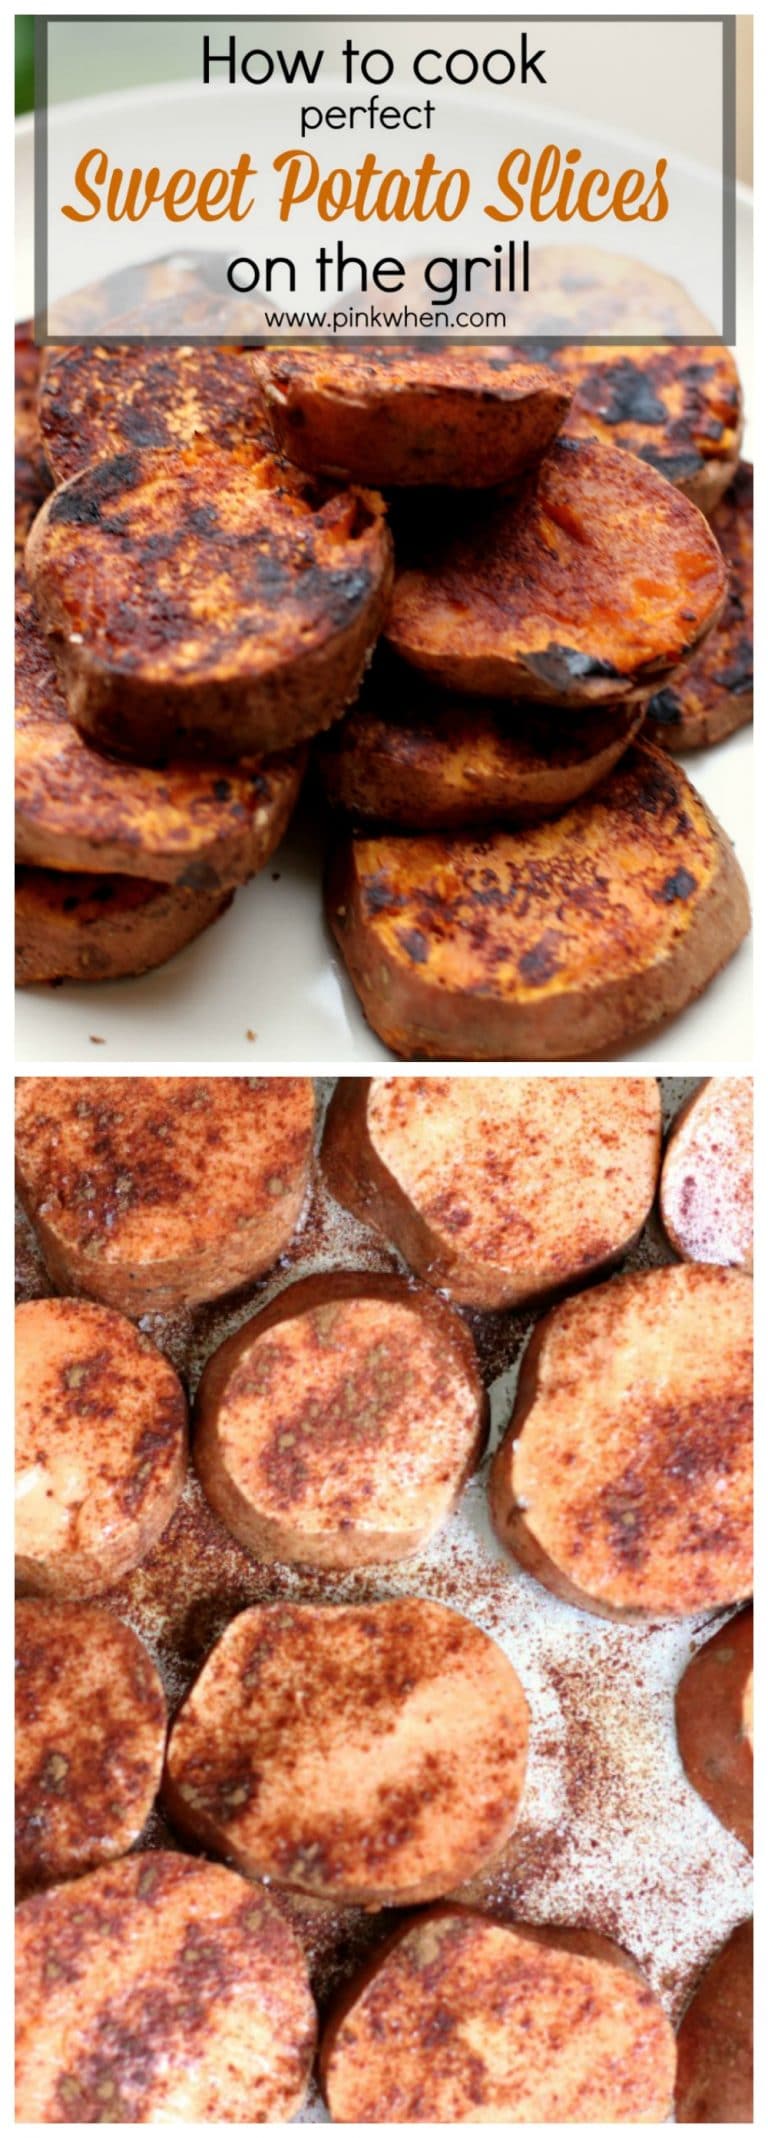 How to cook perfect sweet potato slices on the grill | www.pinkwhen.com